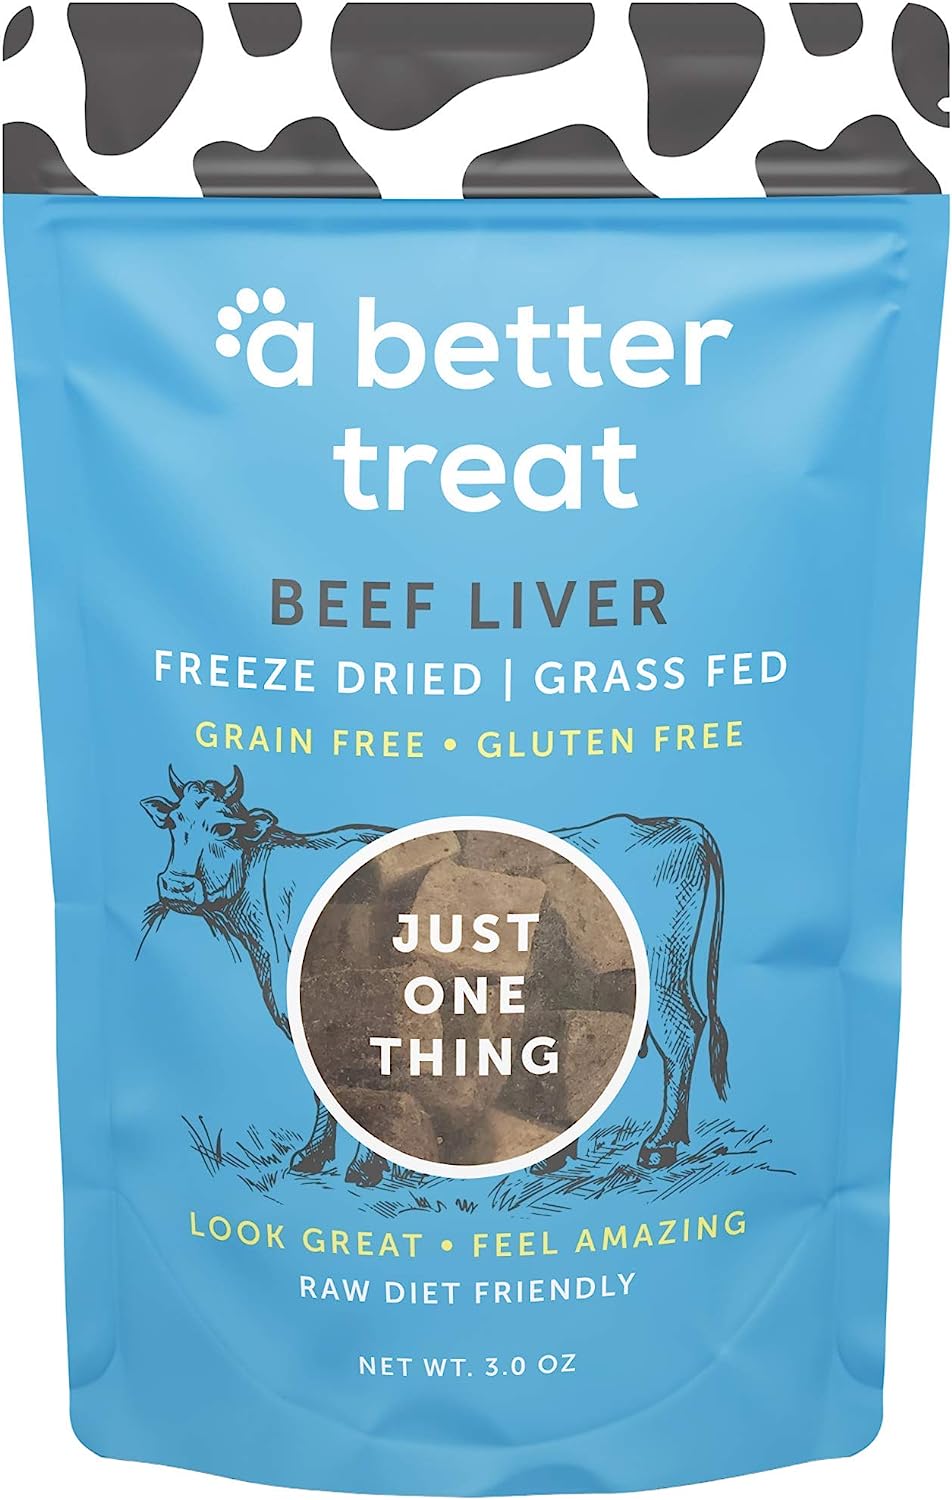 A Better Treat – Freeze Dried Beef Liver